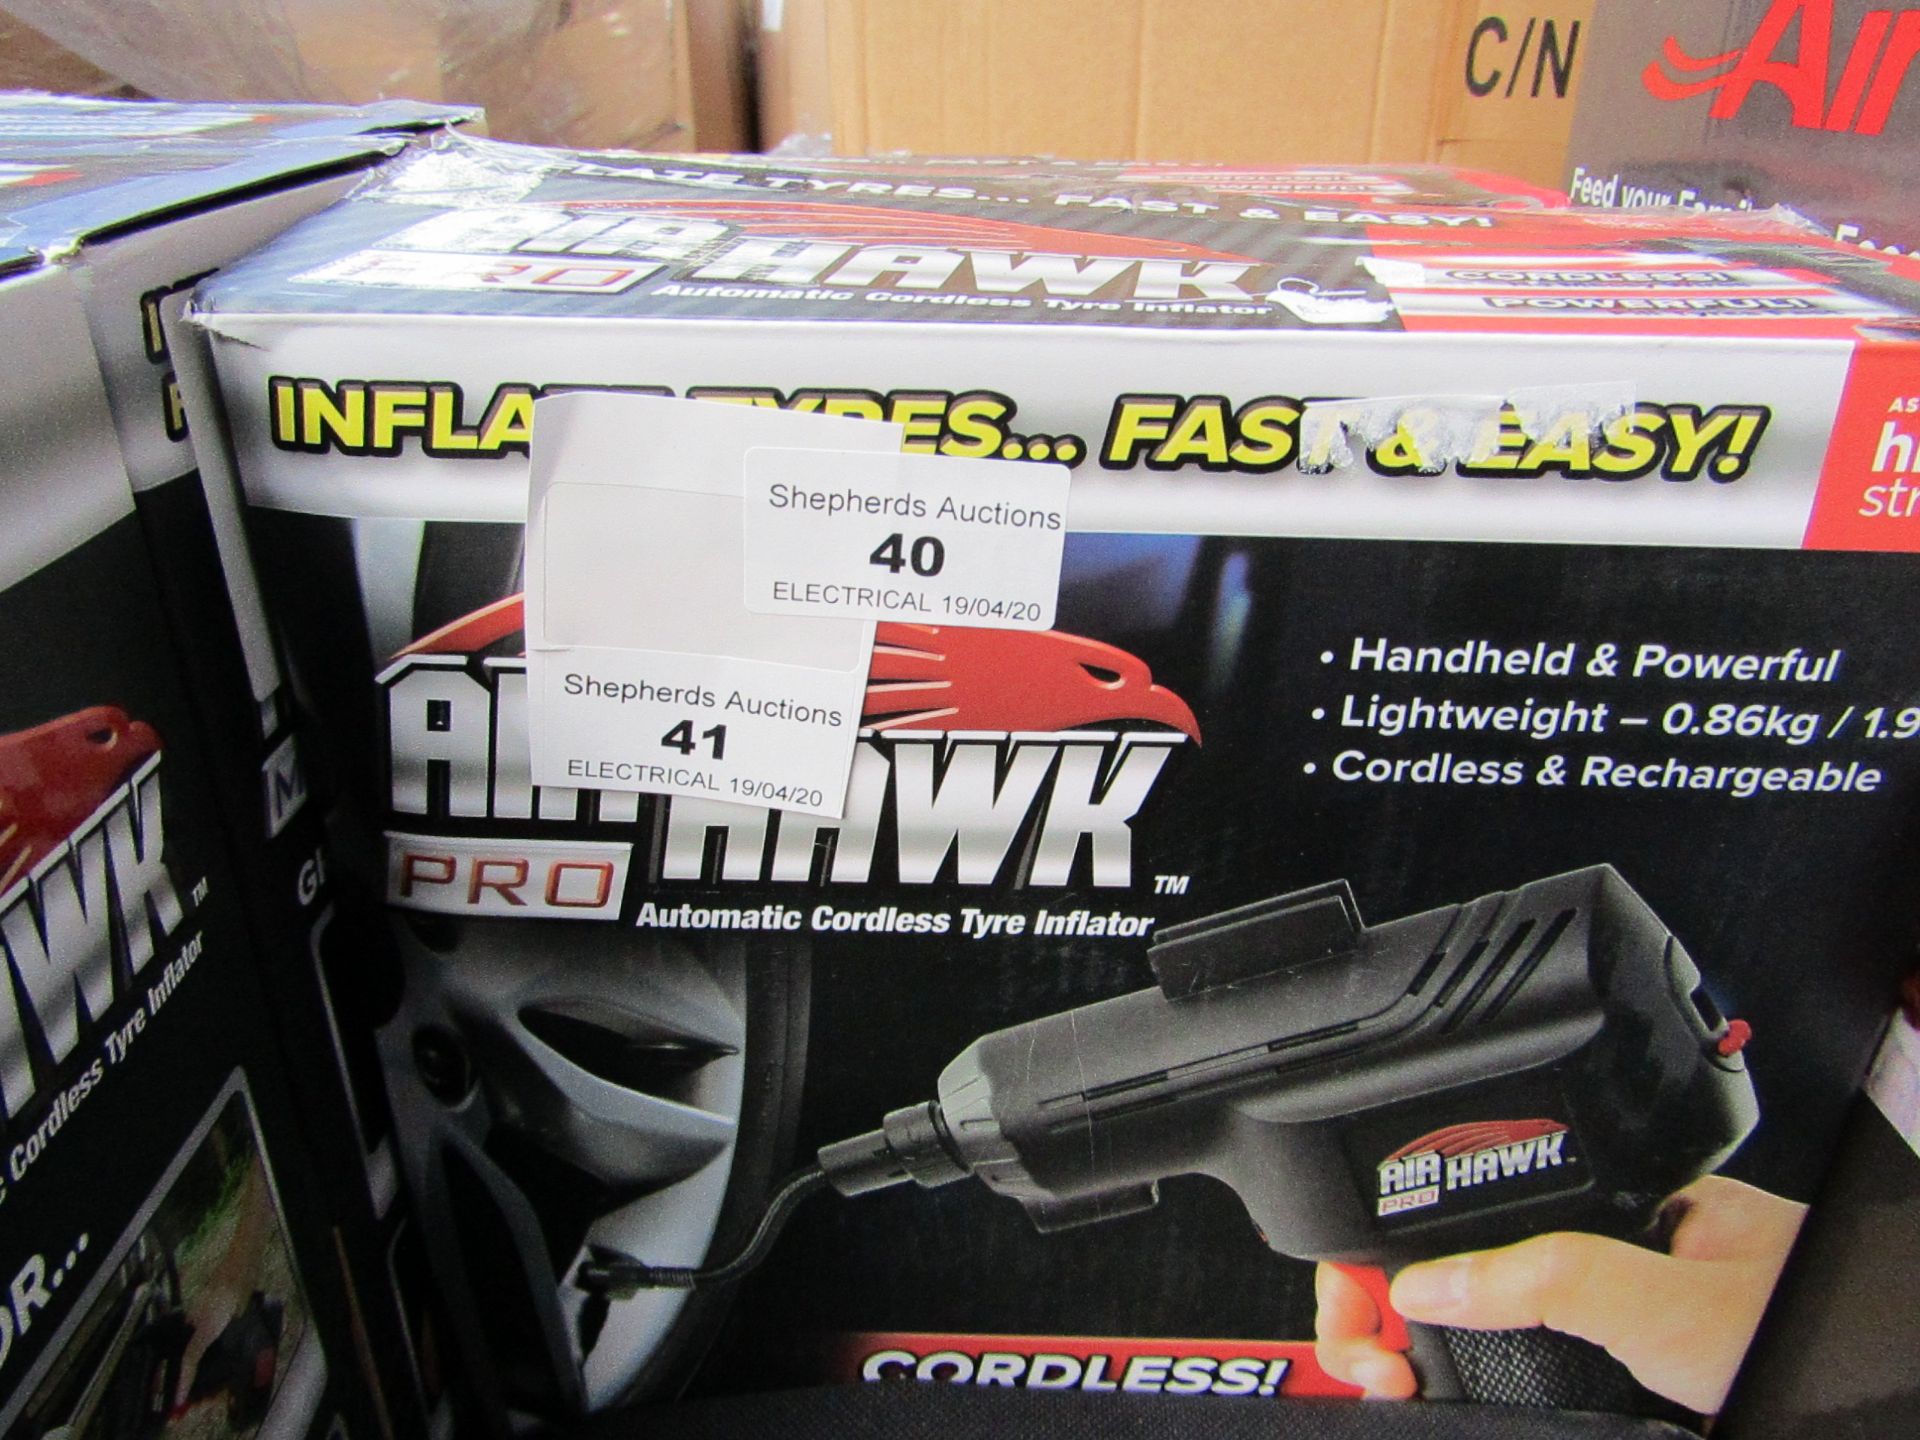 | 1x | AIR HAWK PRO CORDLESS COMPRESSOR | REFURBISHED AND BOXED | NO ONLINE RE-SALE | SKU